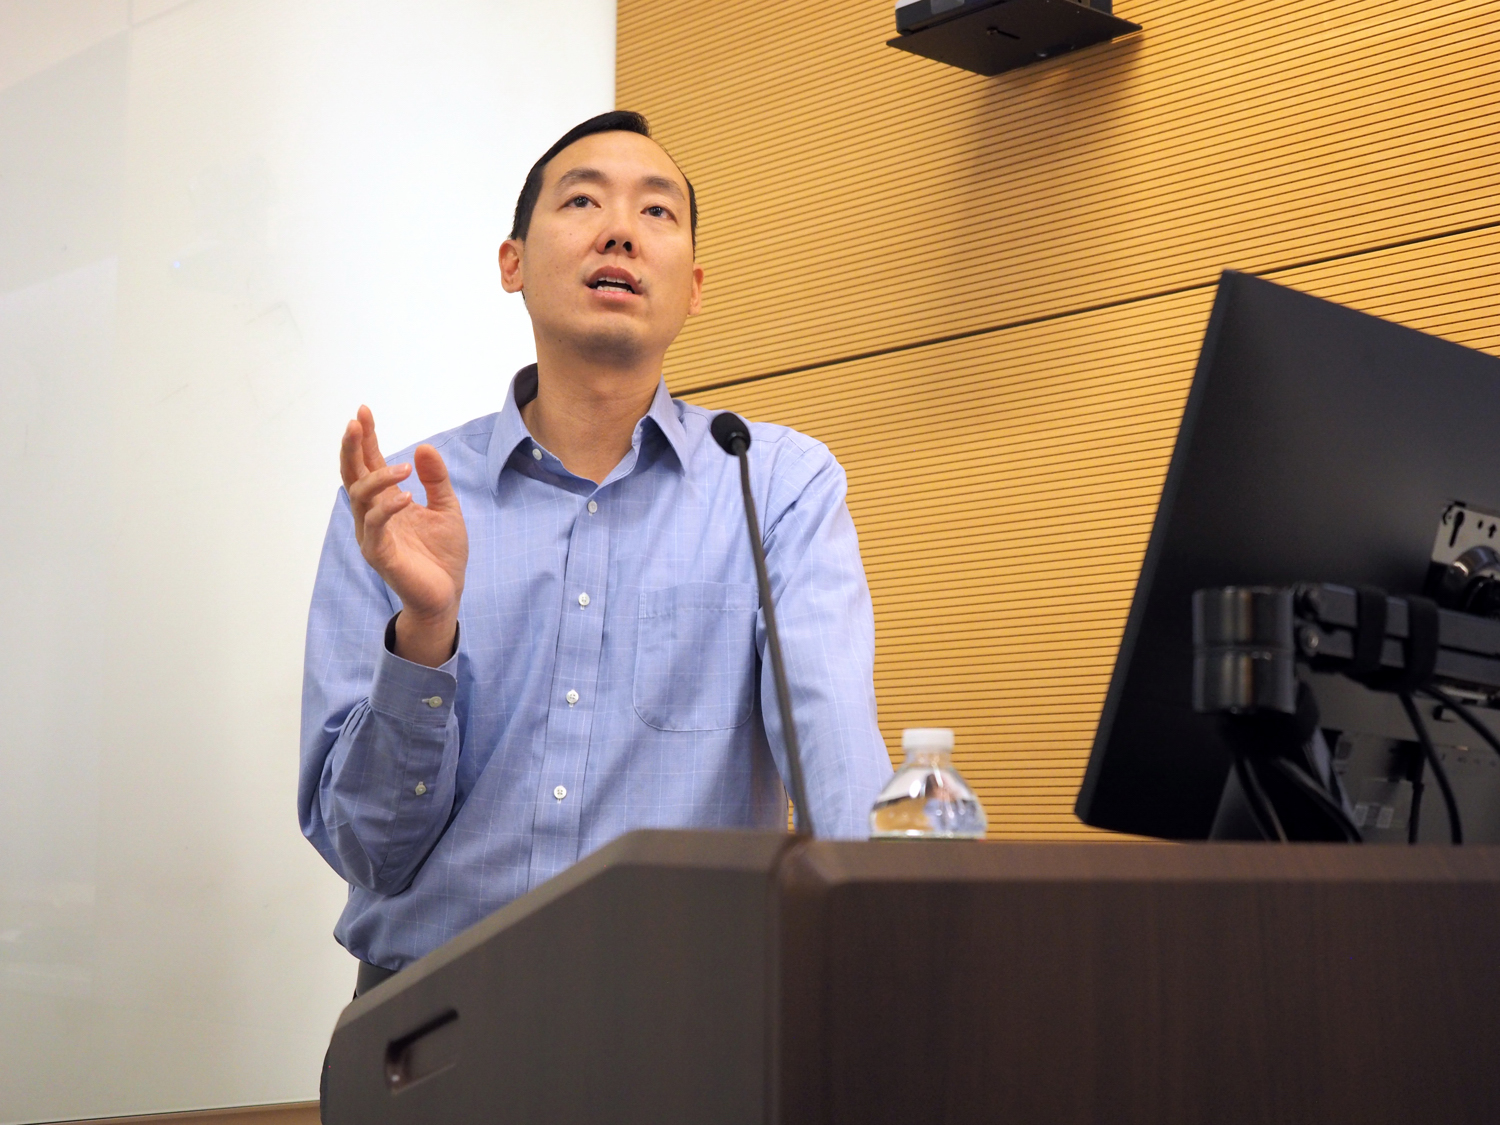 Dr. Andrew Lam’s lecture